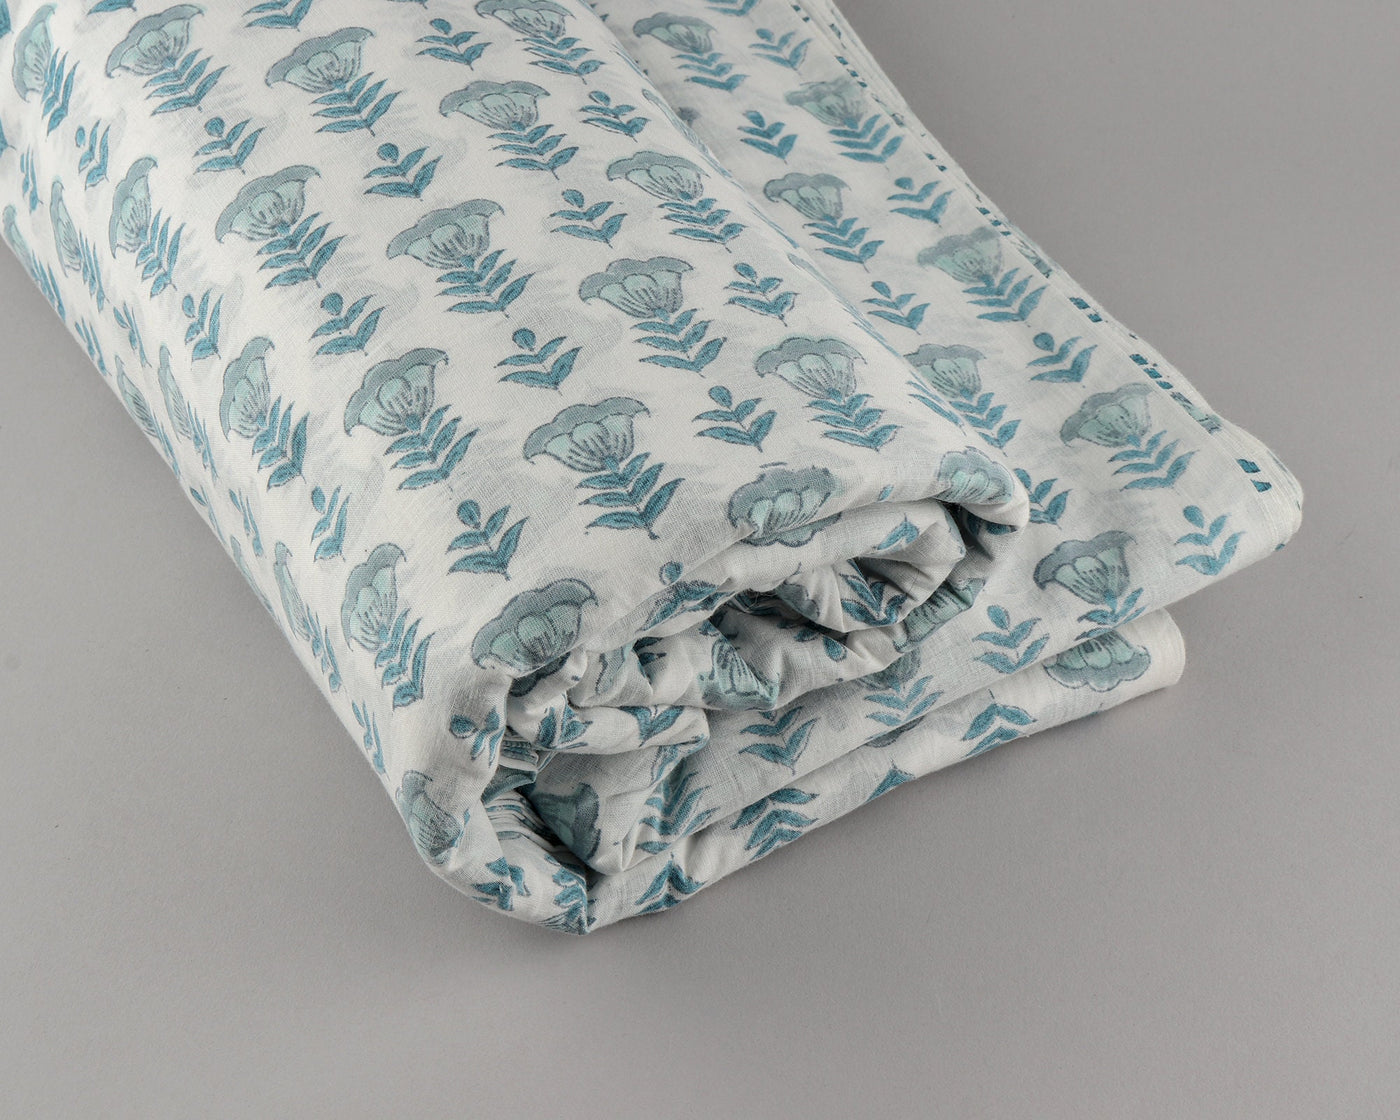 Aquamarine Blue and turquoise Indian Floral Hand Block Printed 100% Pure Cotton Cloth, Fabric by the yard, Womens clothing Curtains Pillows